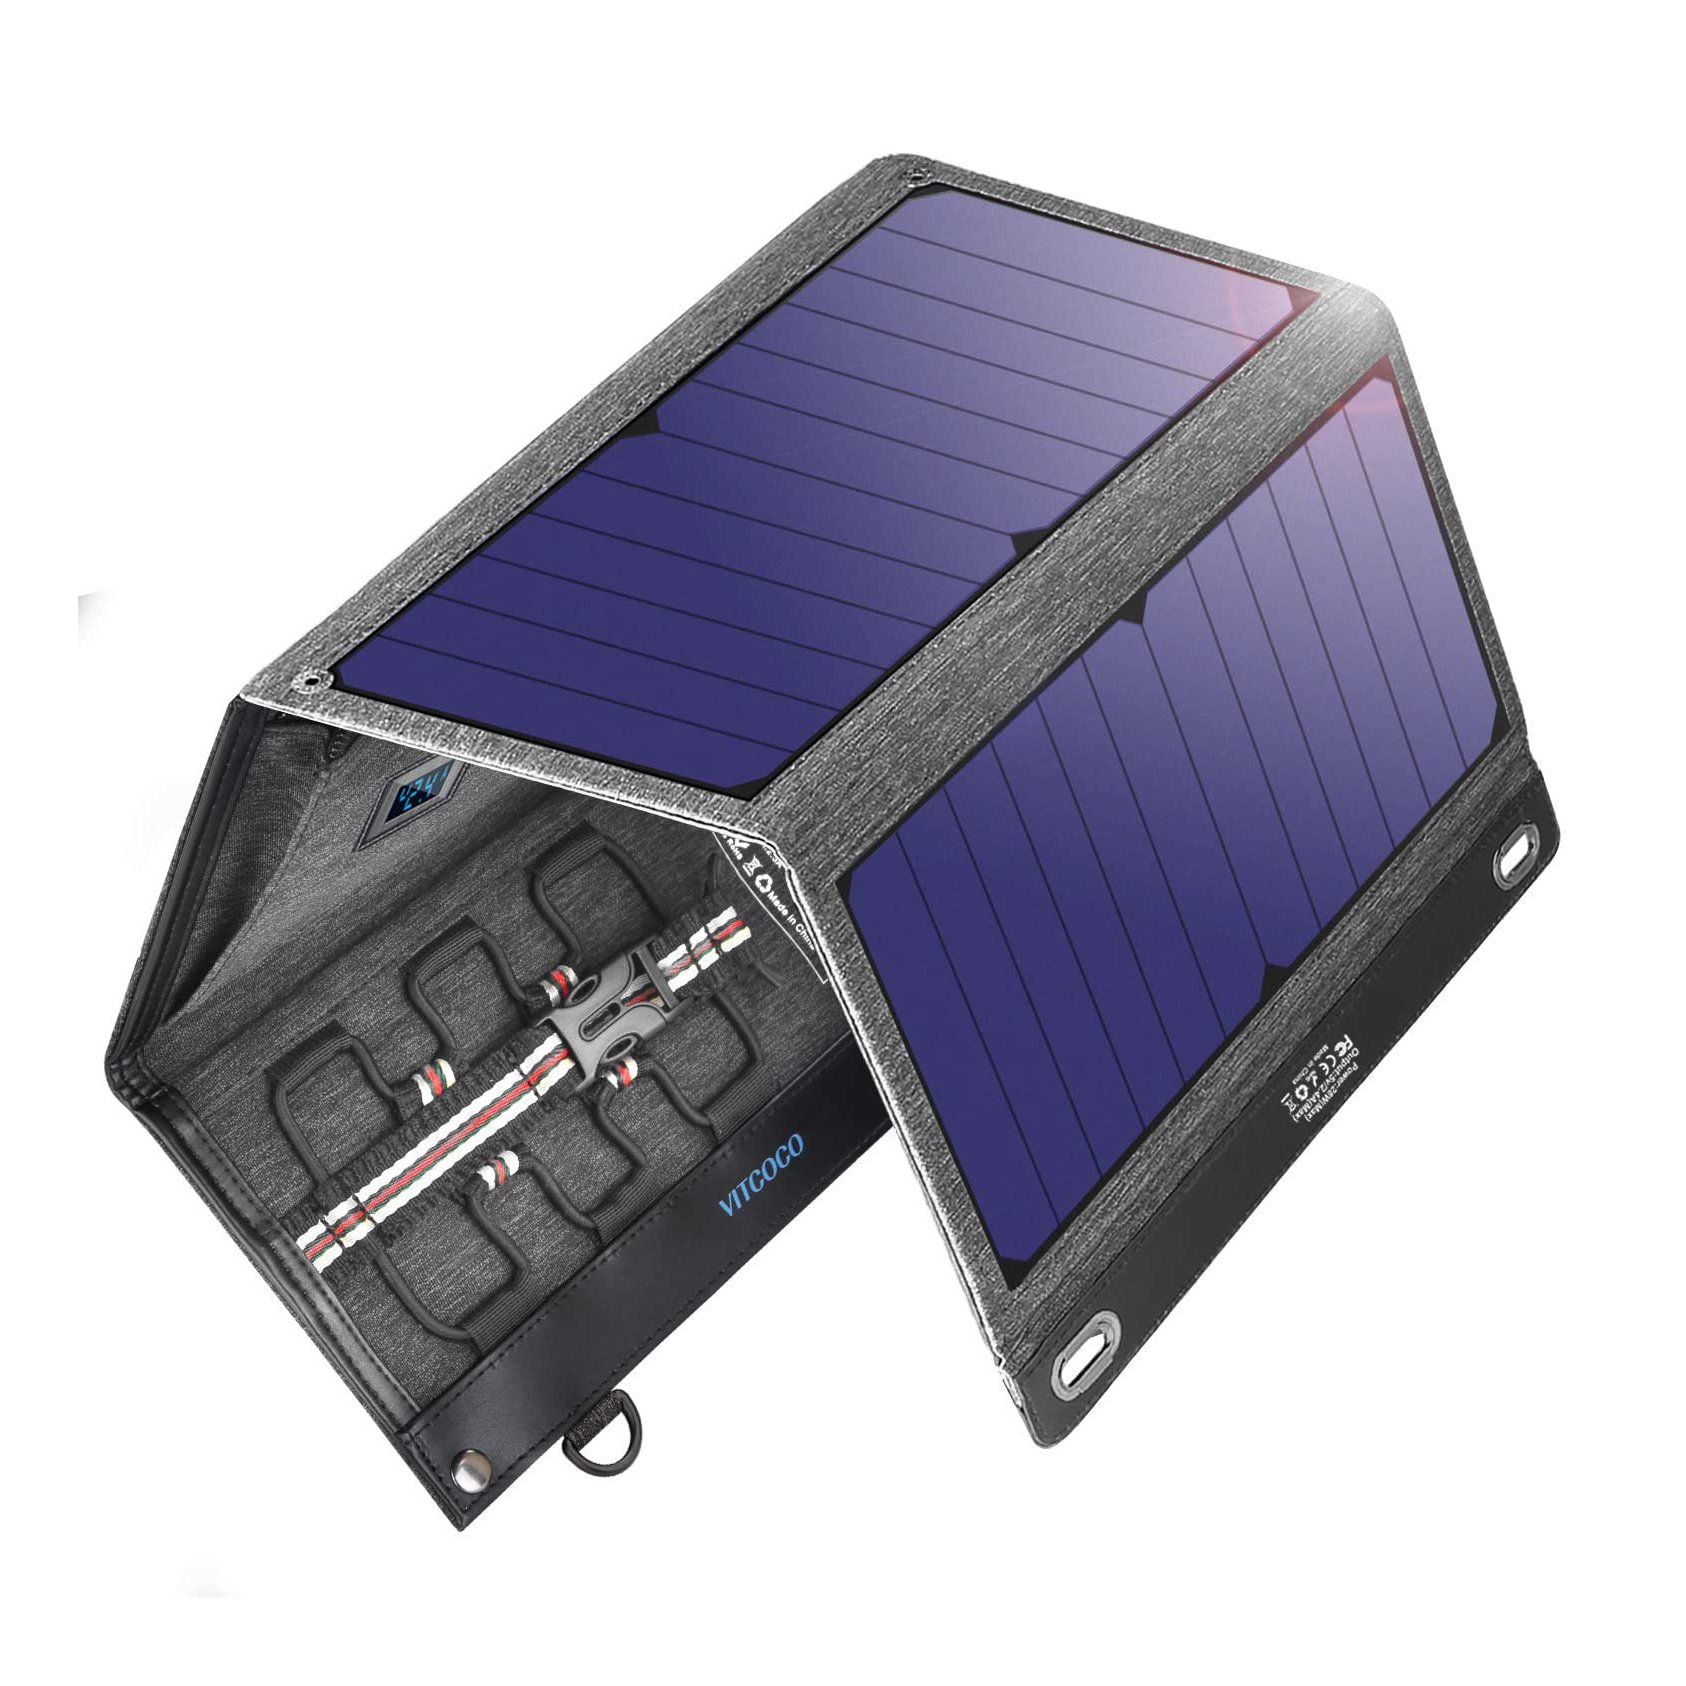 Top 10 Best Patriot Solar Chargers in 2020